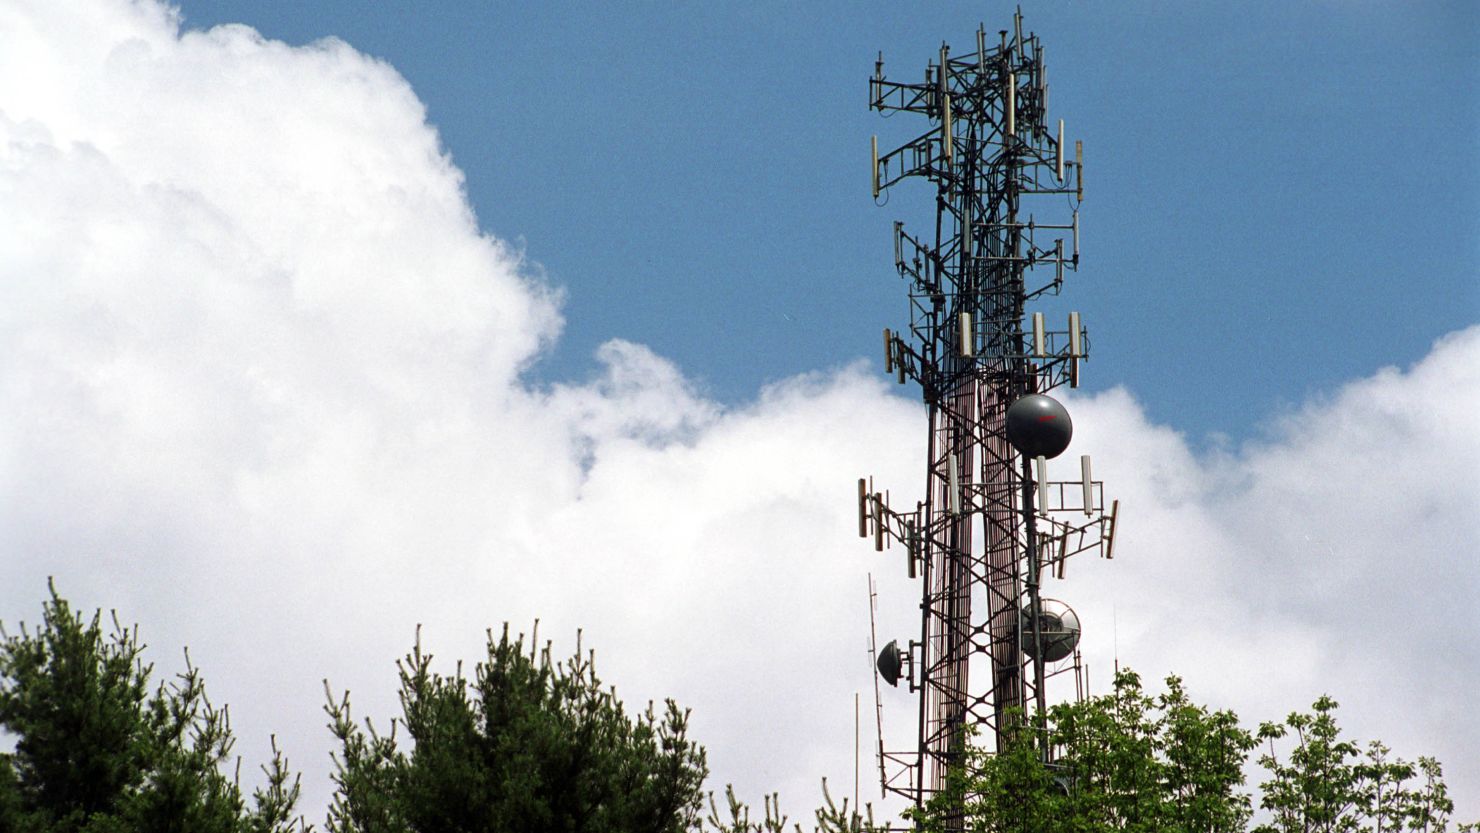 A cell phone tower rises above the trees in 2001 in Sudbury, Massachusetts.